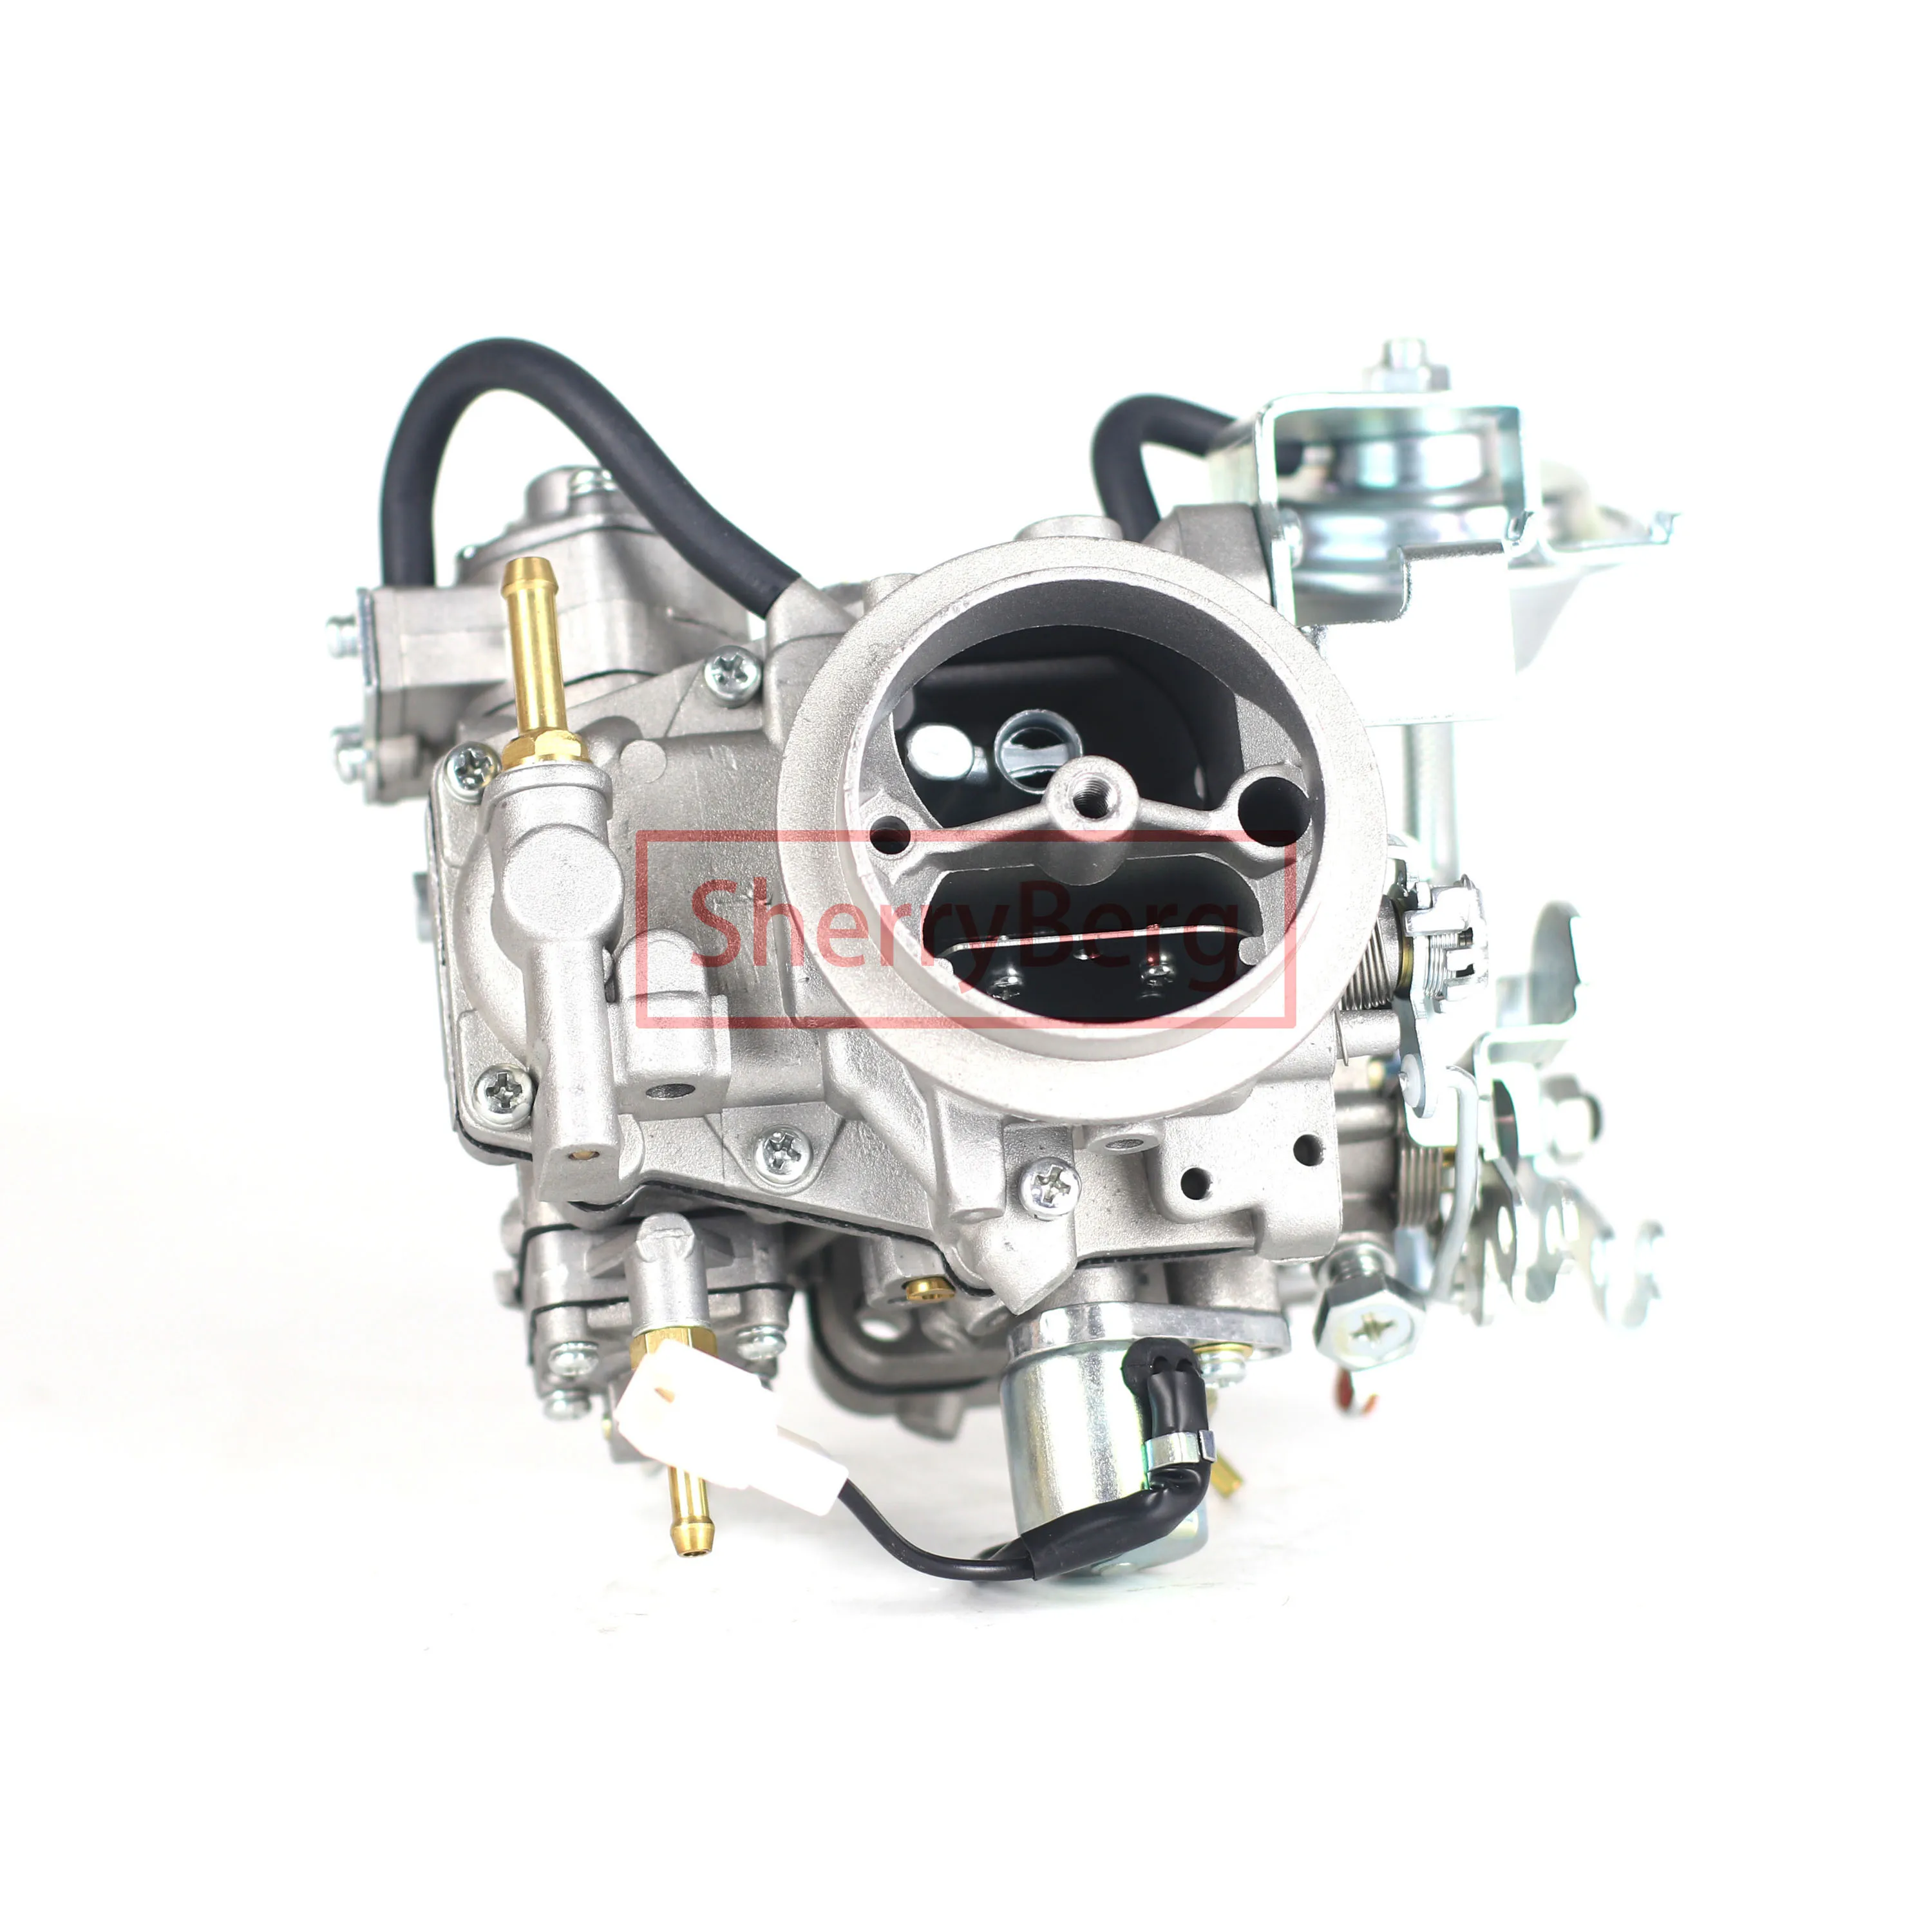 

SherryBerg carb carburettor carby vegaser carb carby Carburetor fit for SUZUKI ALTO 13200-84312 Top quality carburator free ship